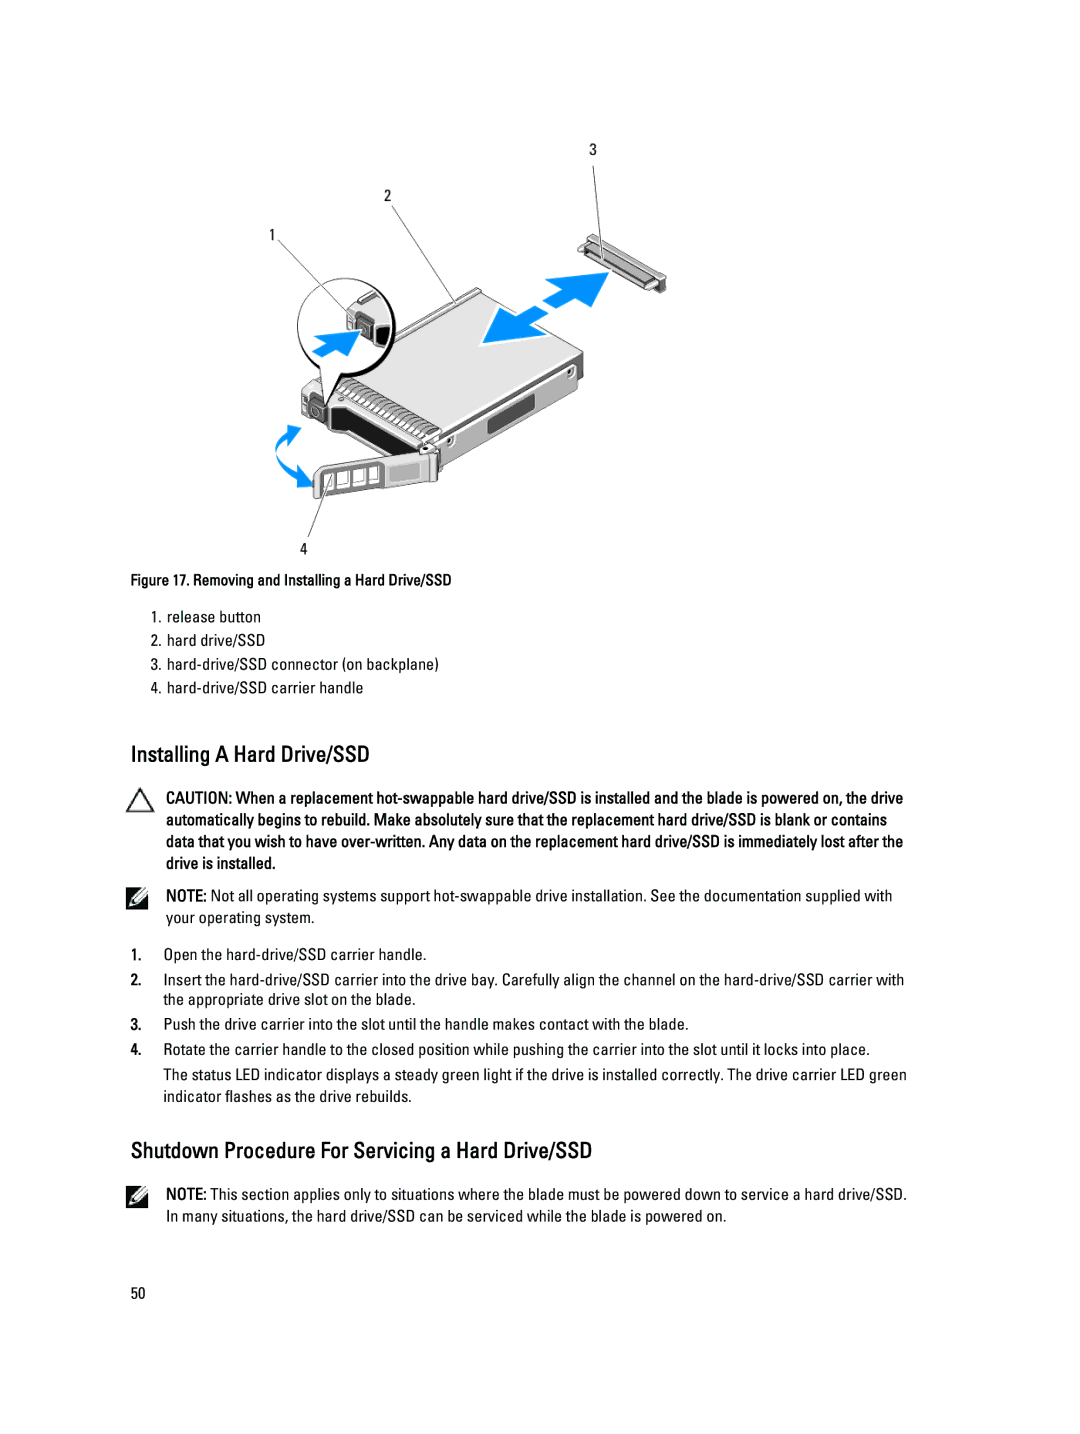 Dell M620 owner manual Installing a Hard Drive/SSD, Shutdown Procedure For Servicing a Hard Drive/SSD 